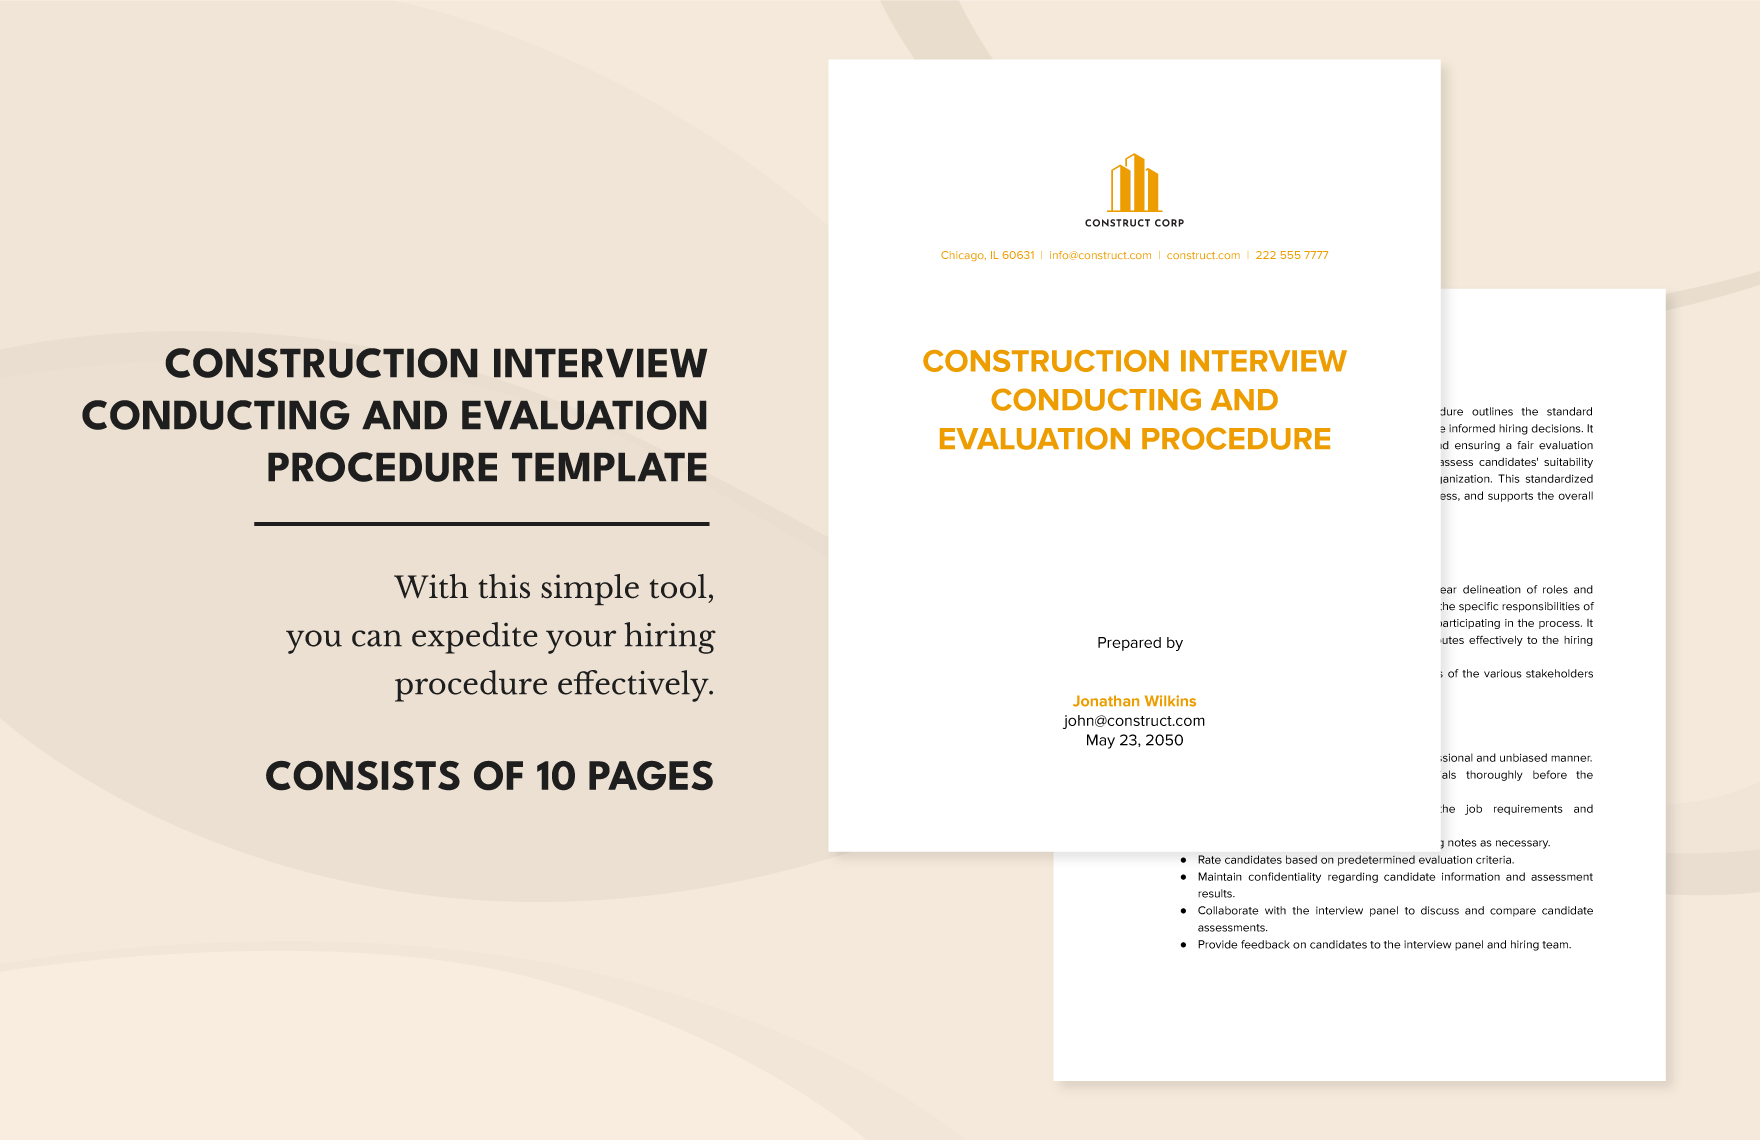 Construction Interview Conducting and Evaluation Procedure Template